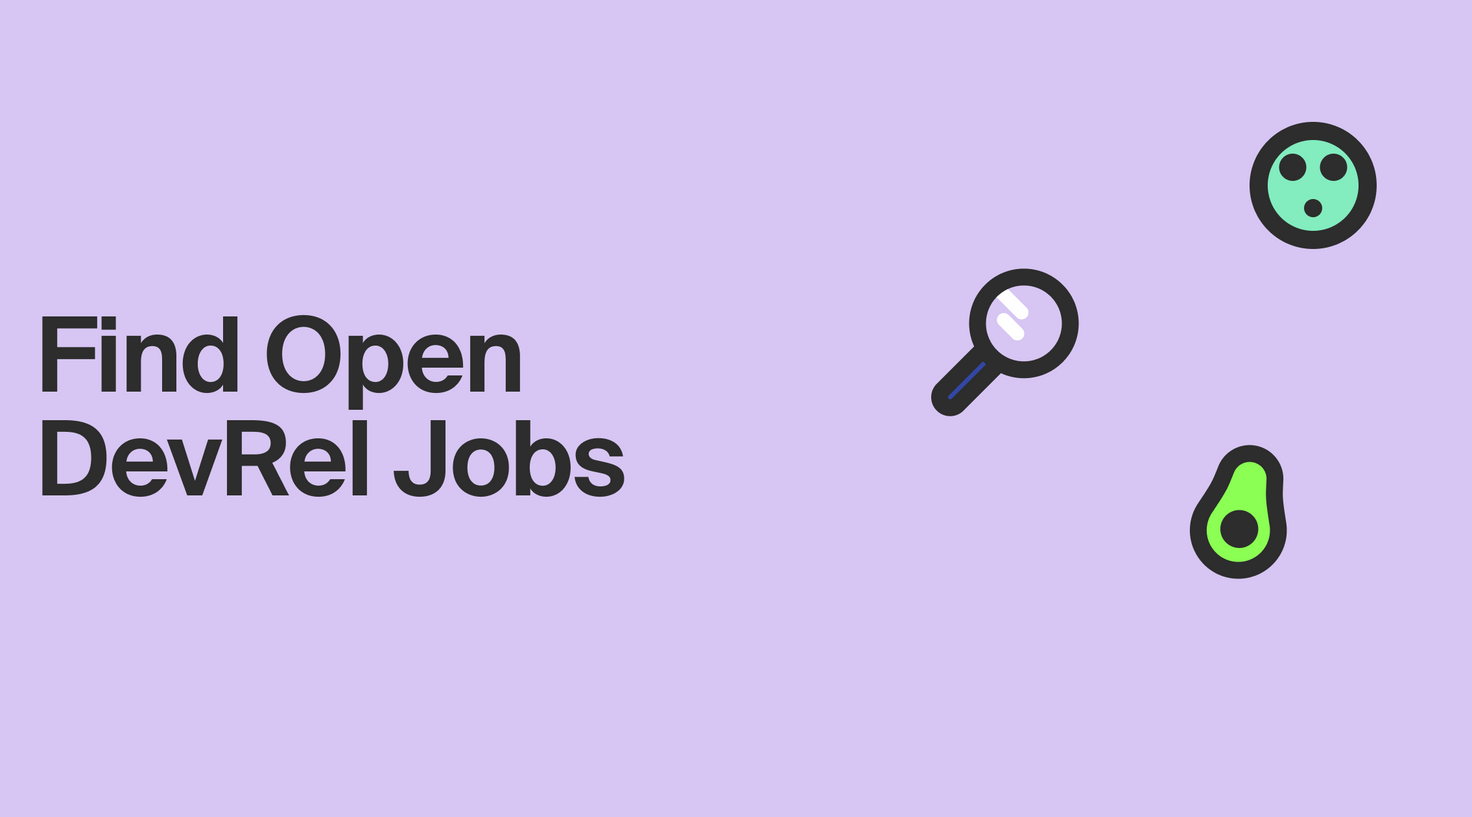 Where to Look for DevRel Jobs